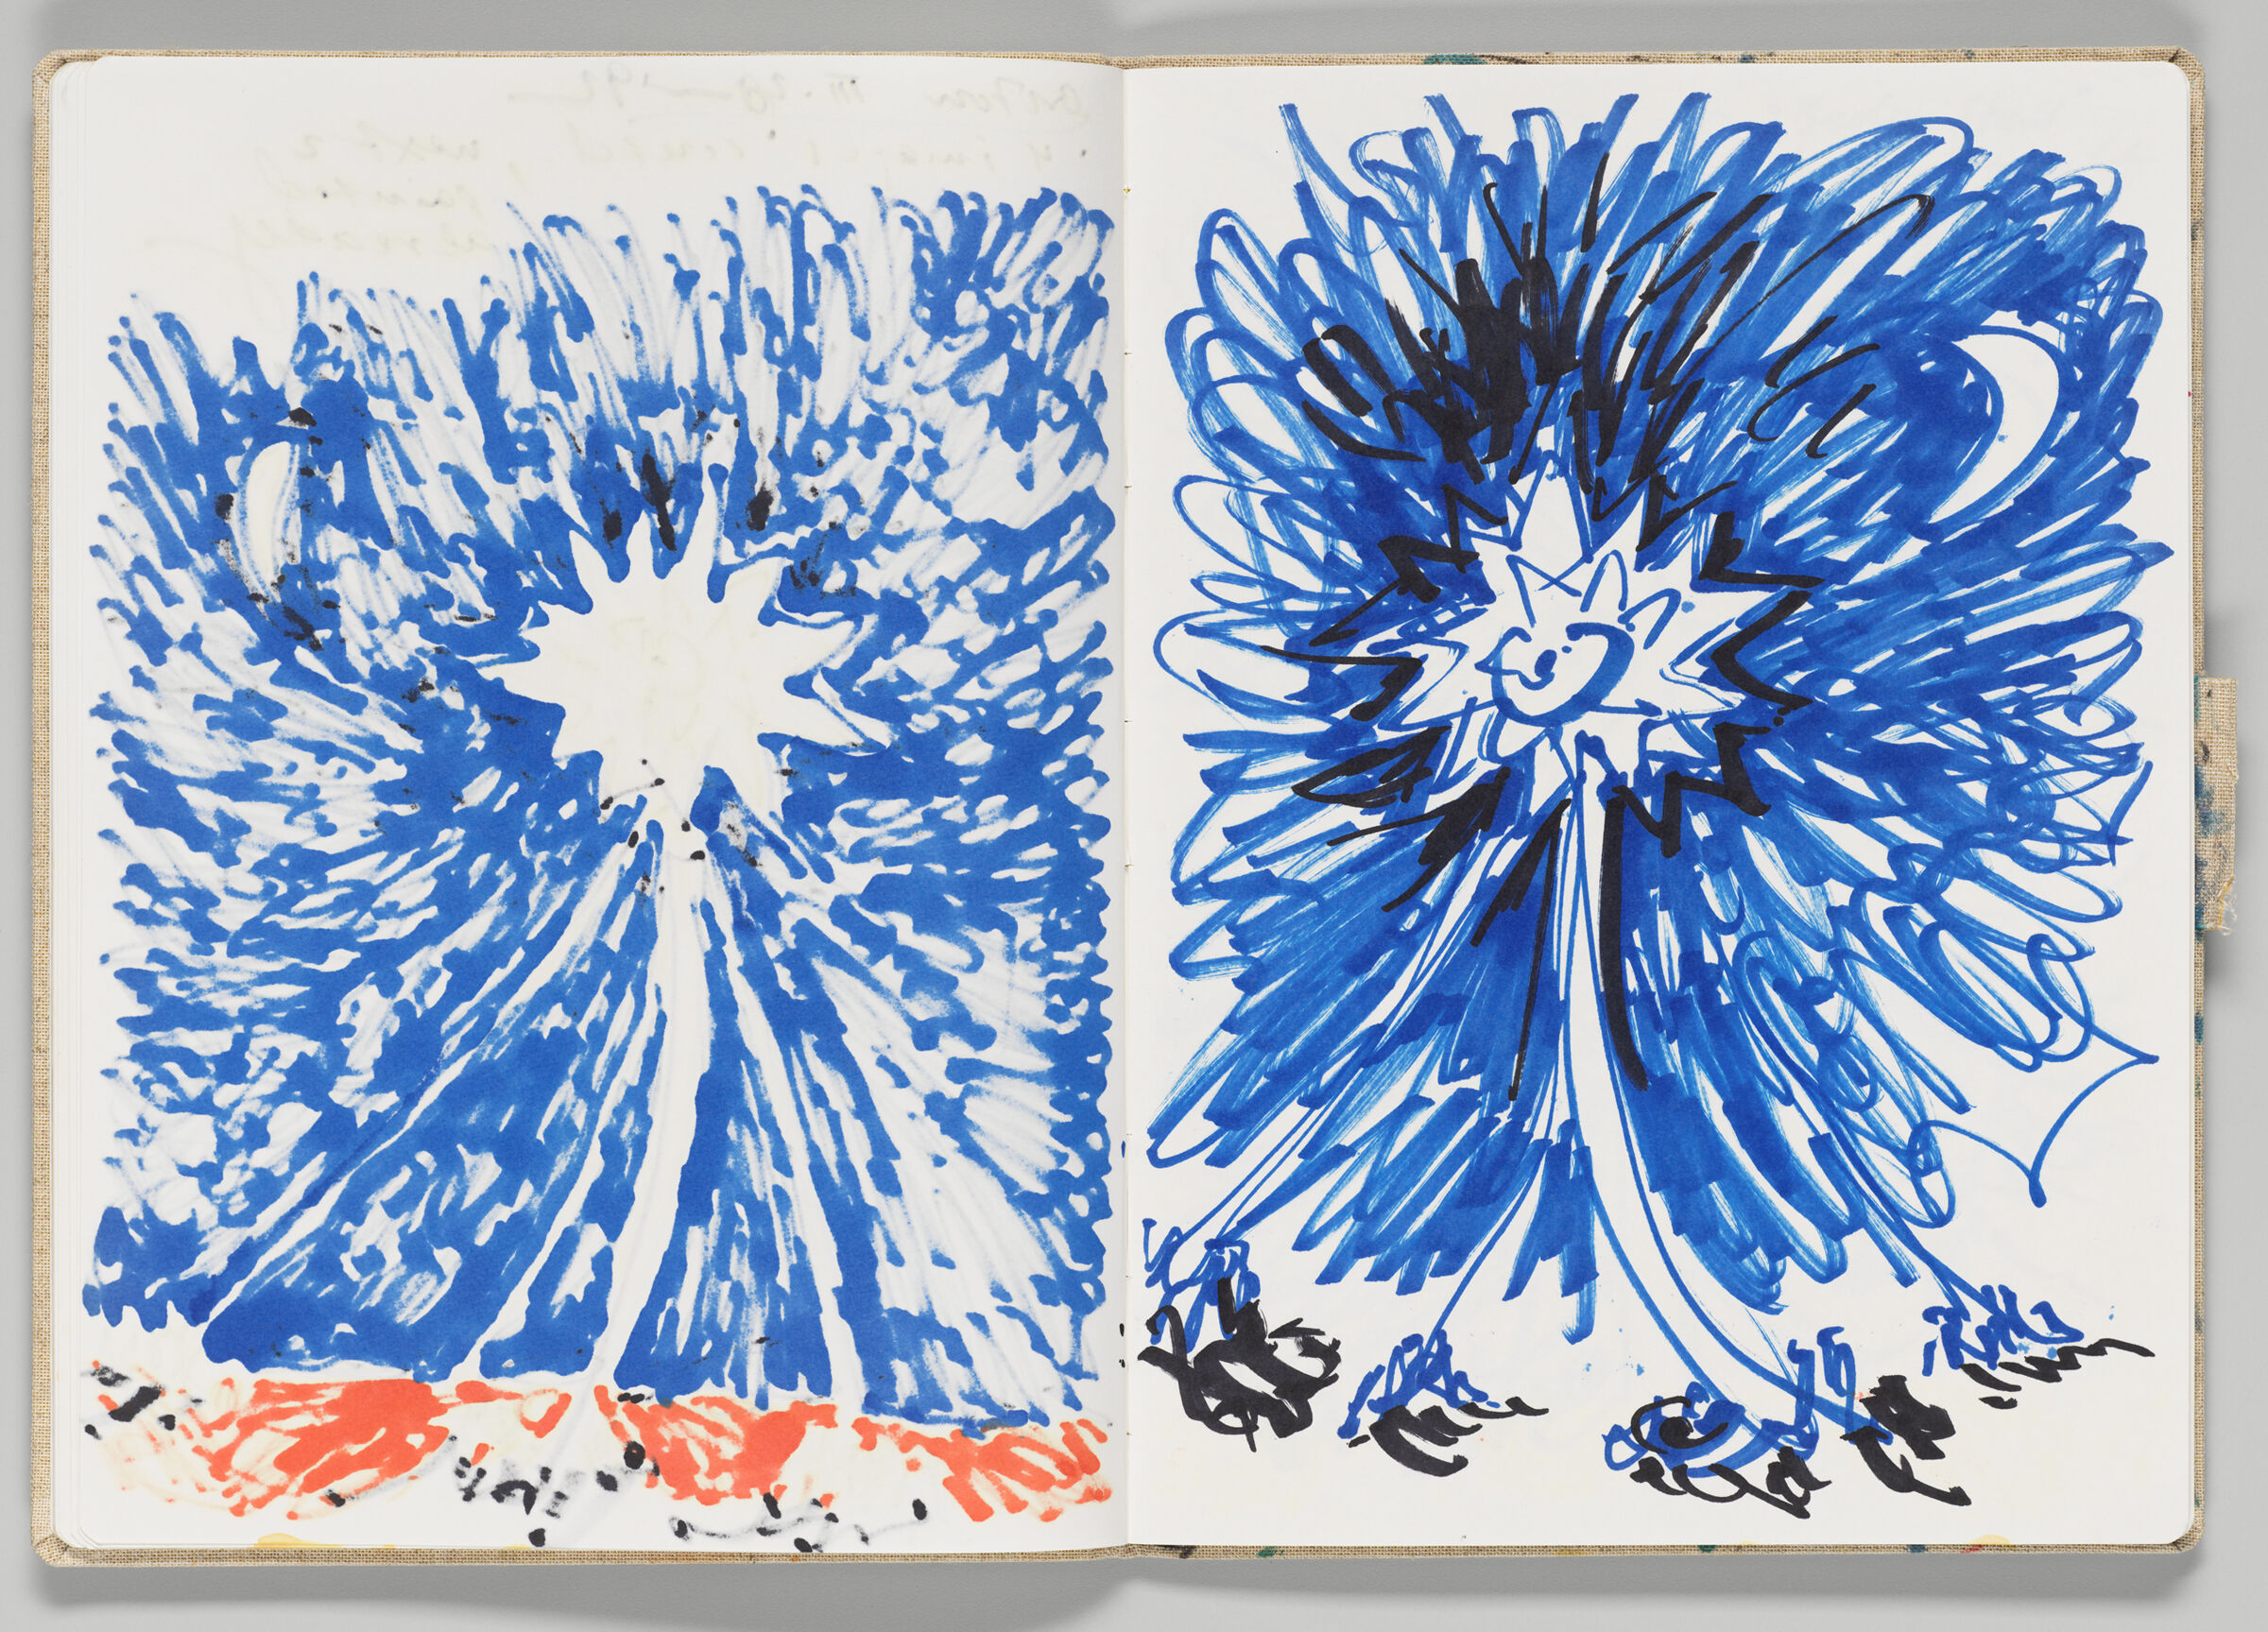 Untitled (Bleed-Through Of Previous Page, Left Page); Untitled (Sketch Of Past Sky Event For Goauches, Right Page)